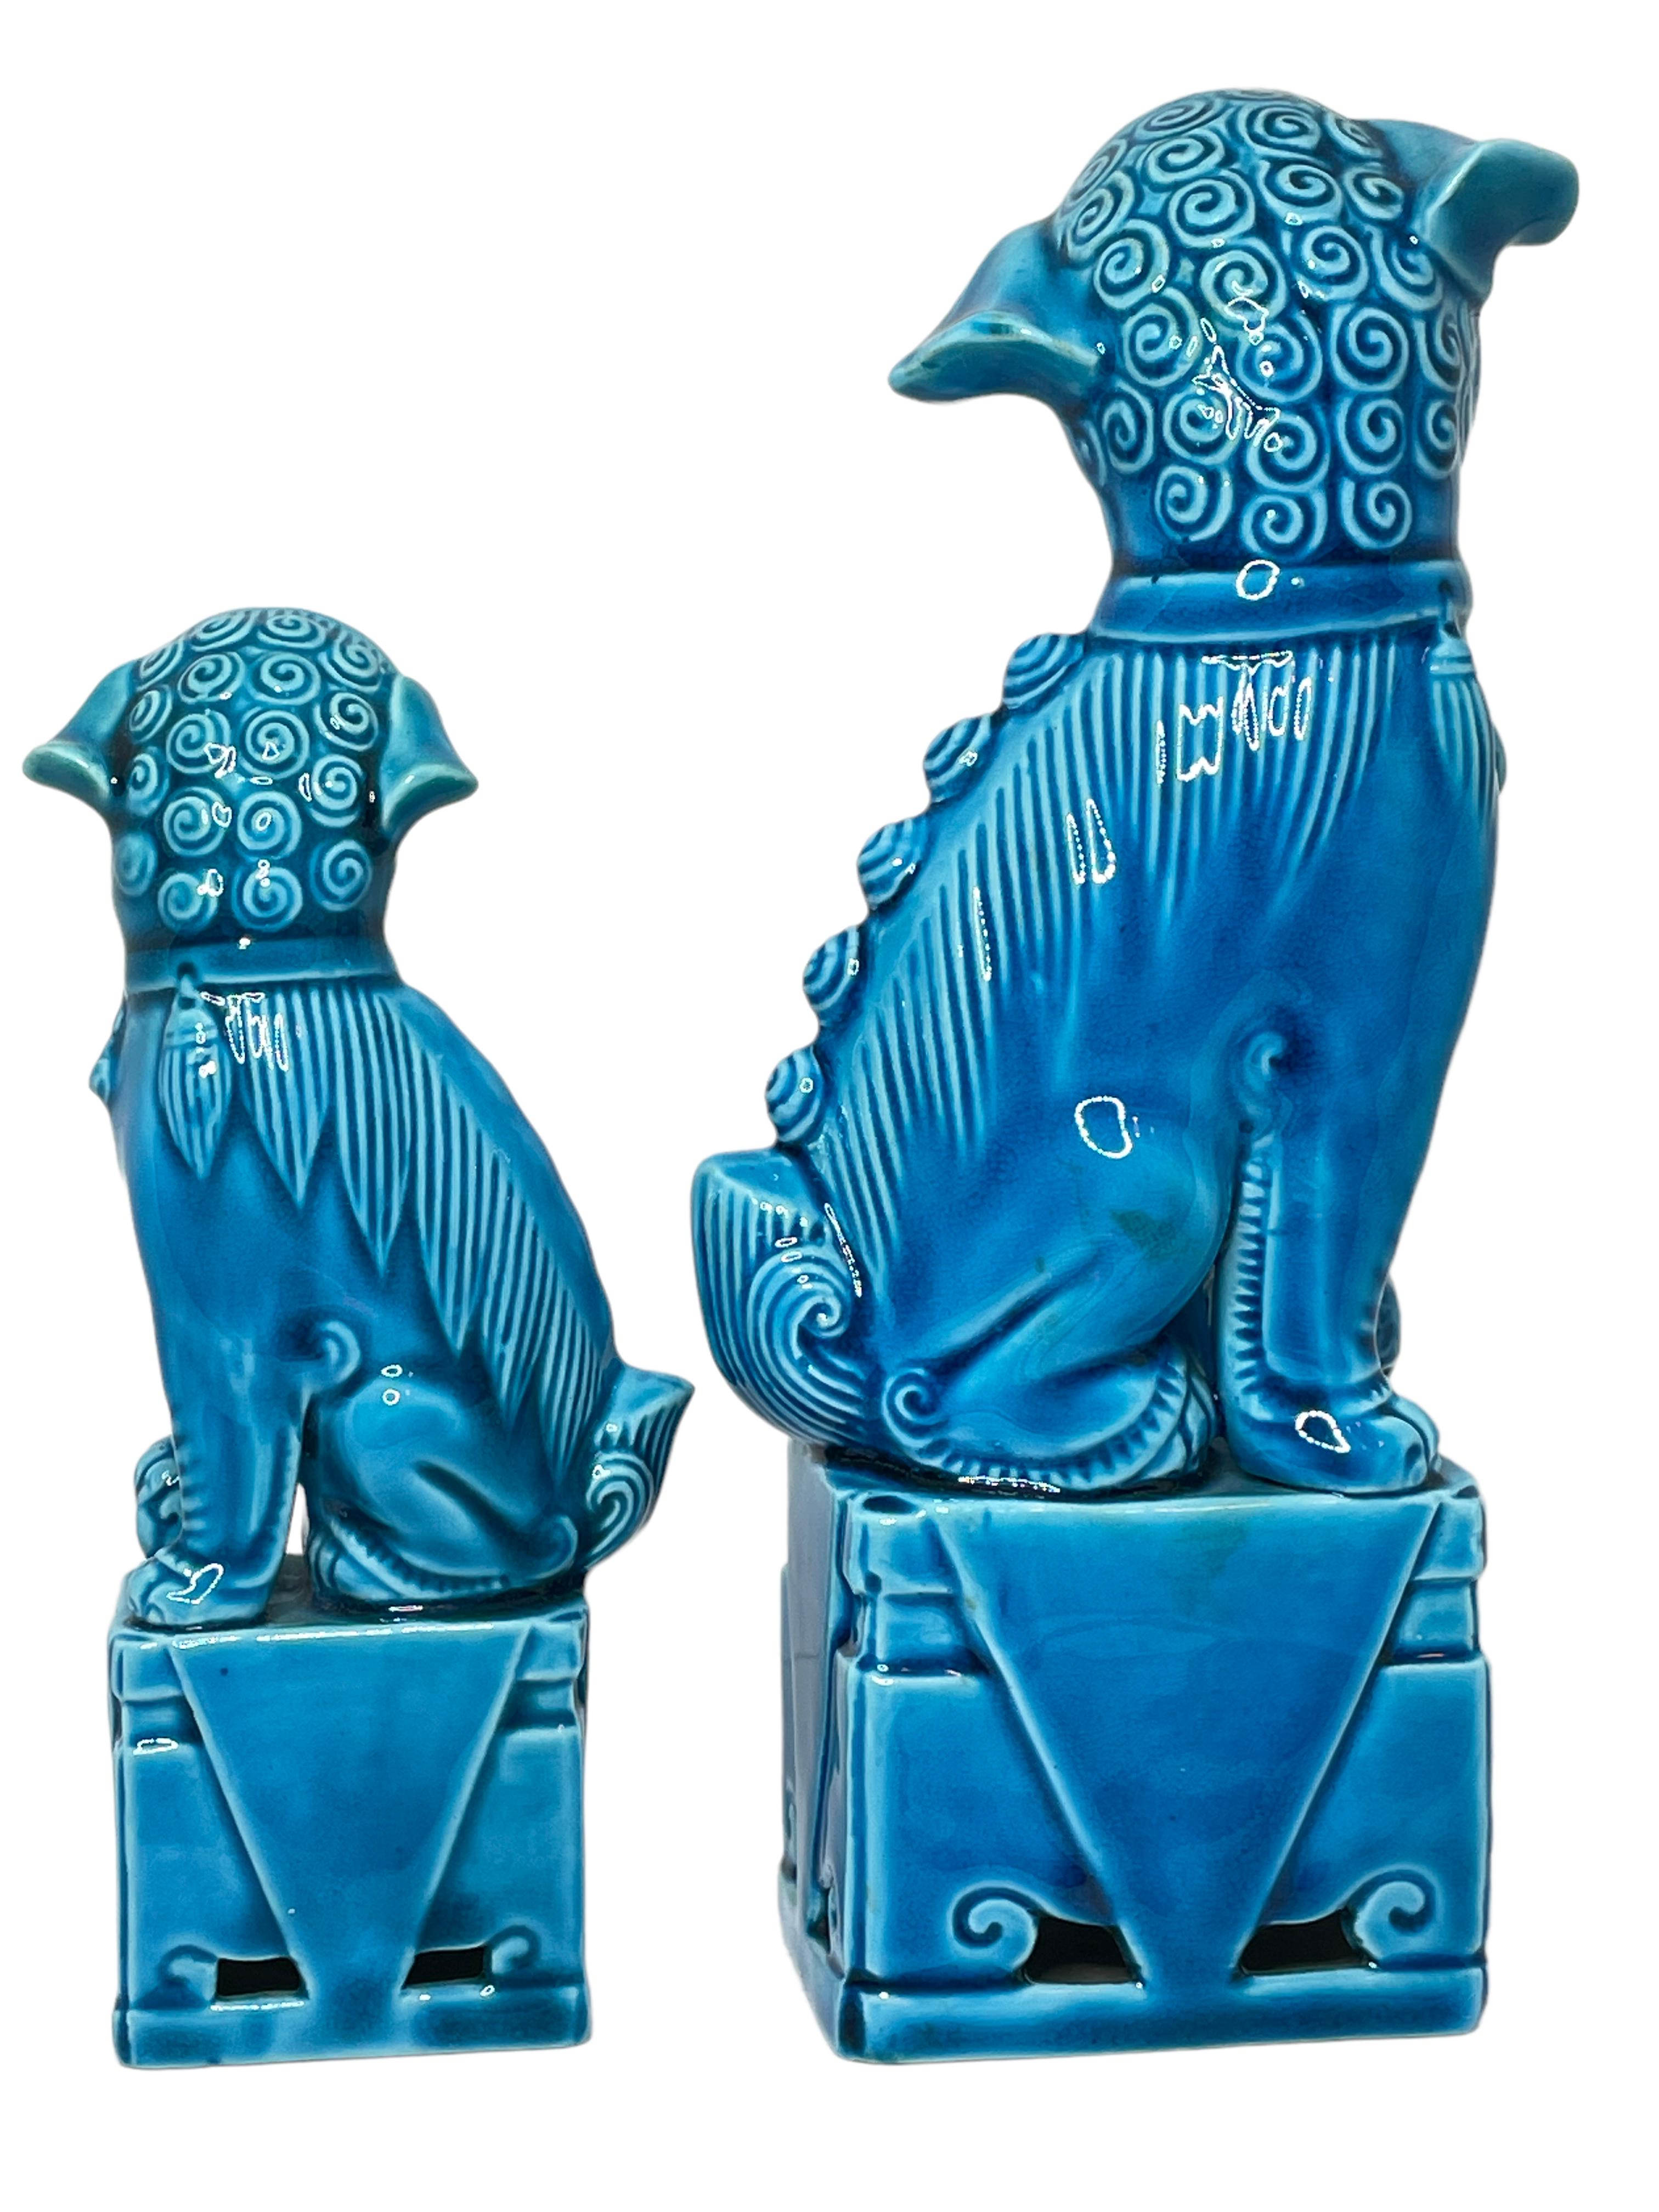 Chinese Set of Two Decorative Turquoise Blue Ceramic Foo Dogs Sculptures For Sale